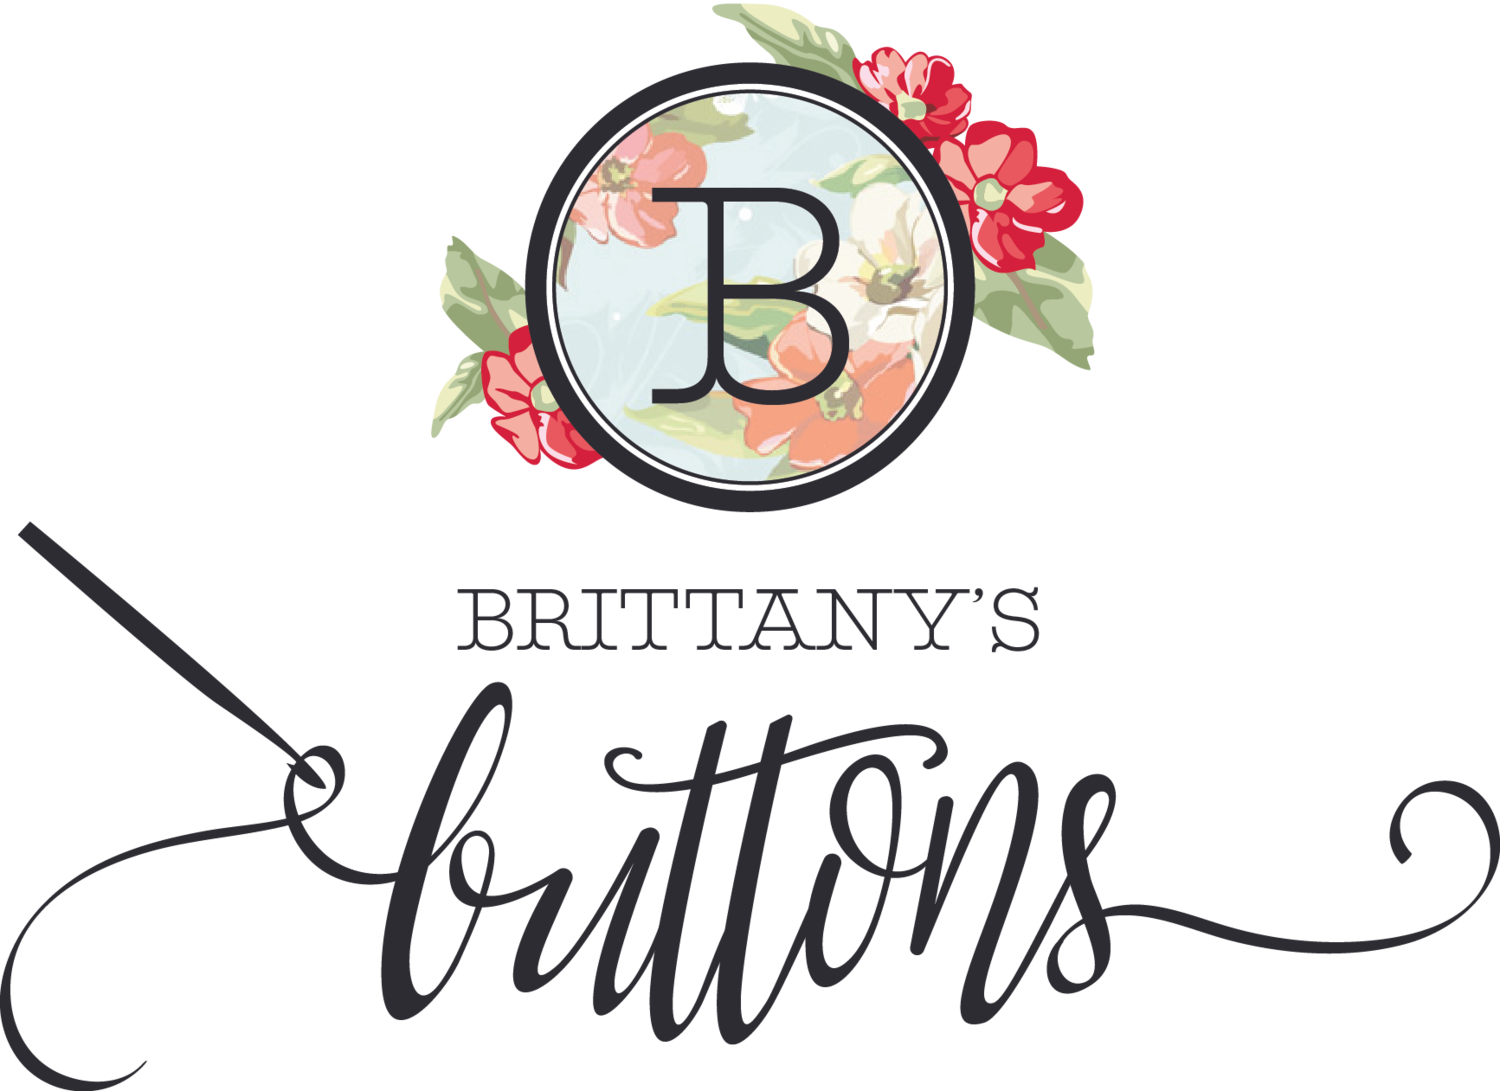 Brittany's Buttons